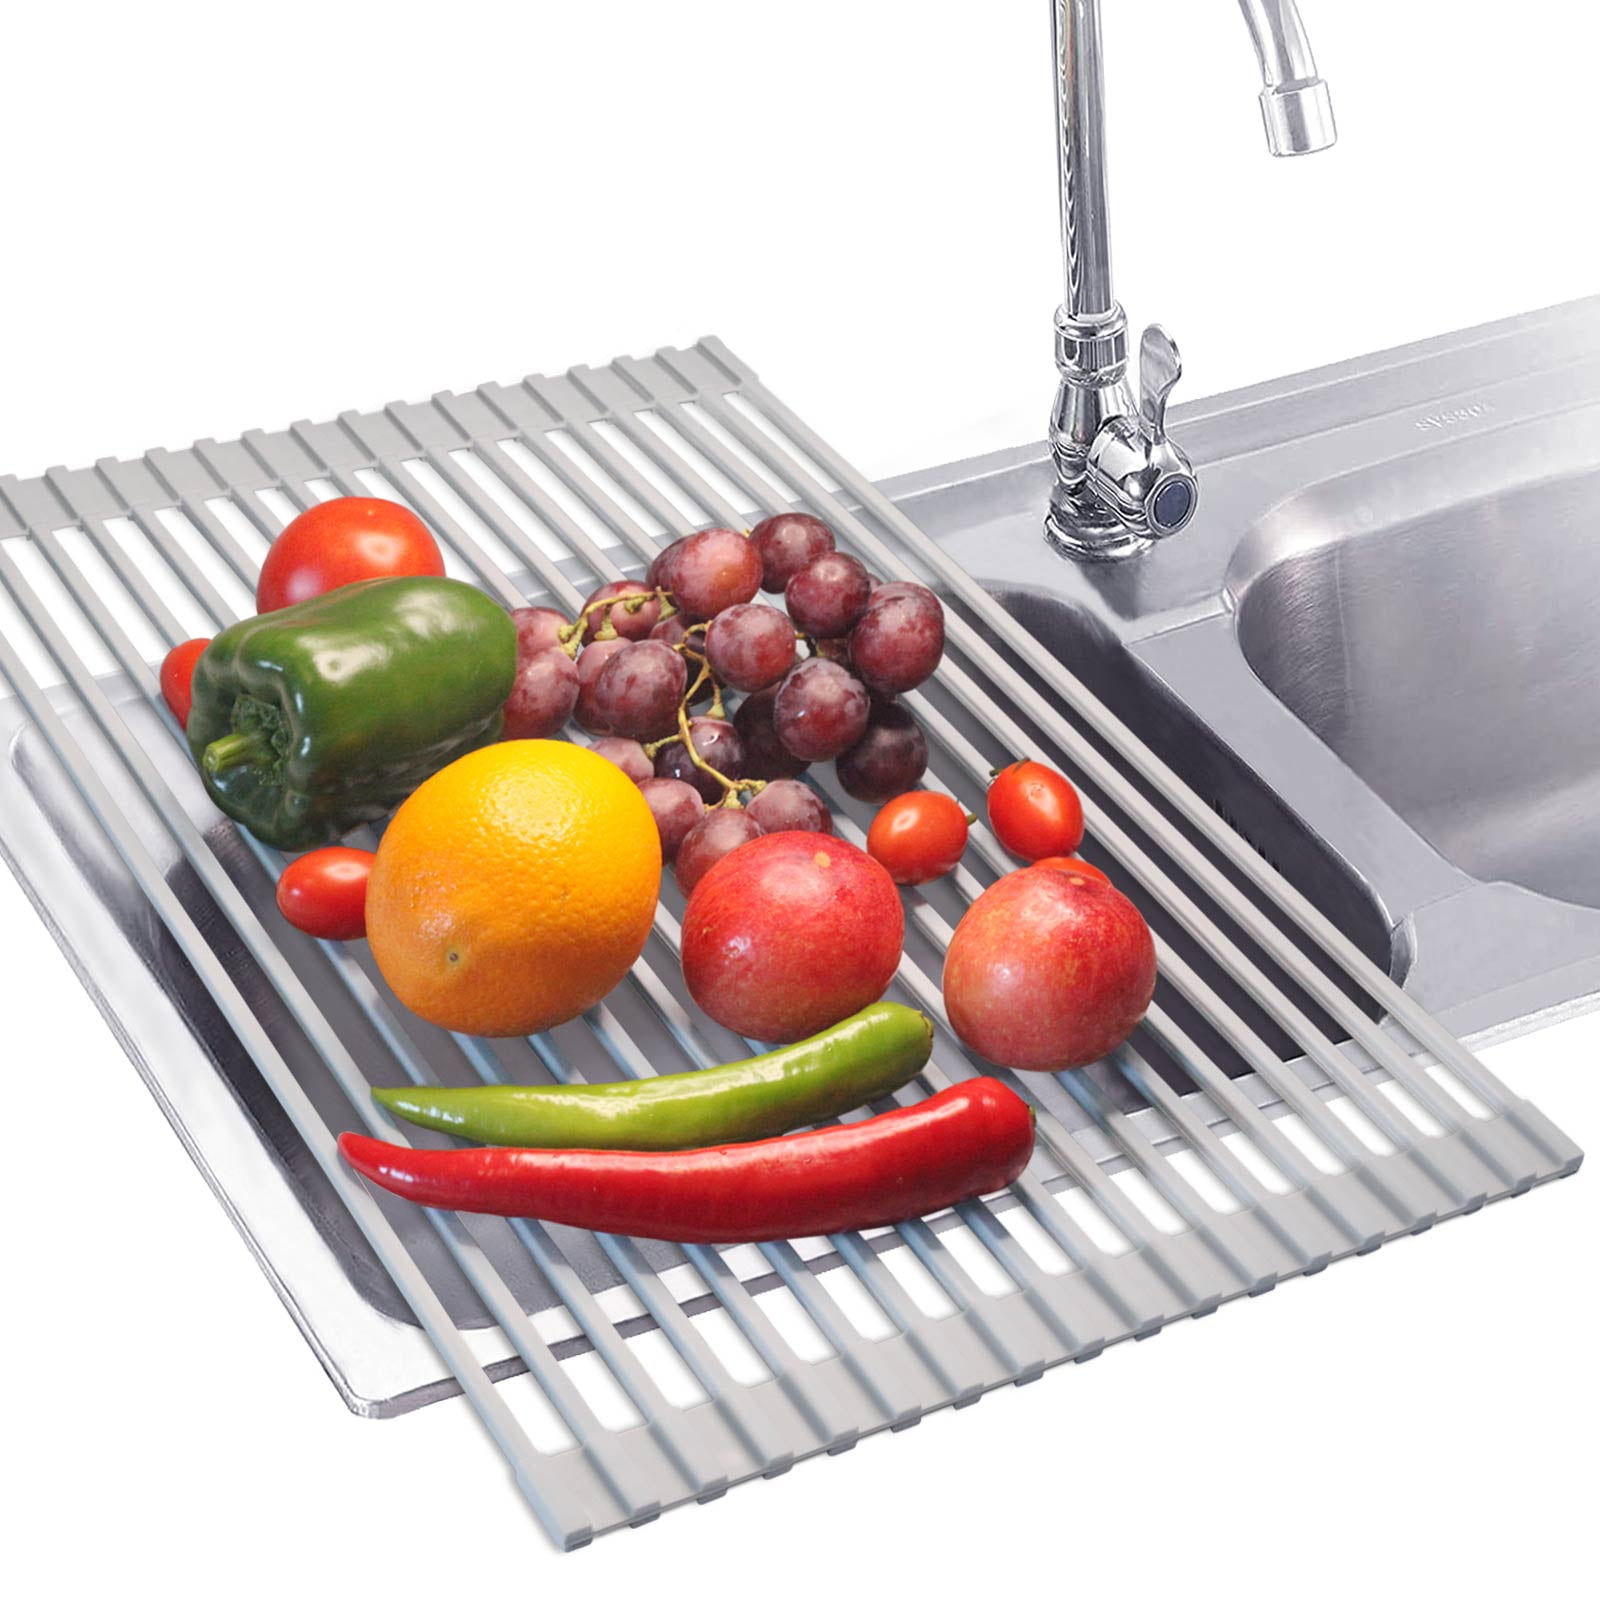 kitidy Over The Sink Multipurpose Roll-Up Dish Drying Rack - Stainless Steel  Foldable Sink Dish Drainer with Utensil Caddy – Kitidy